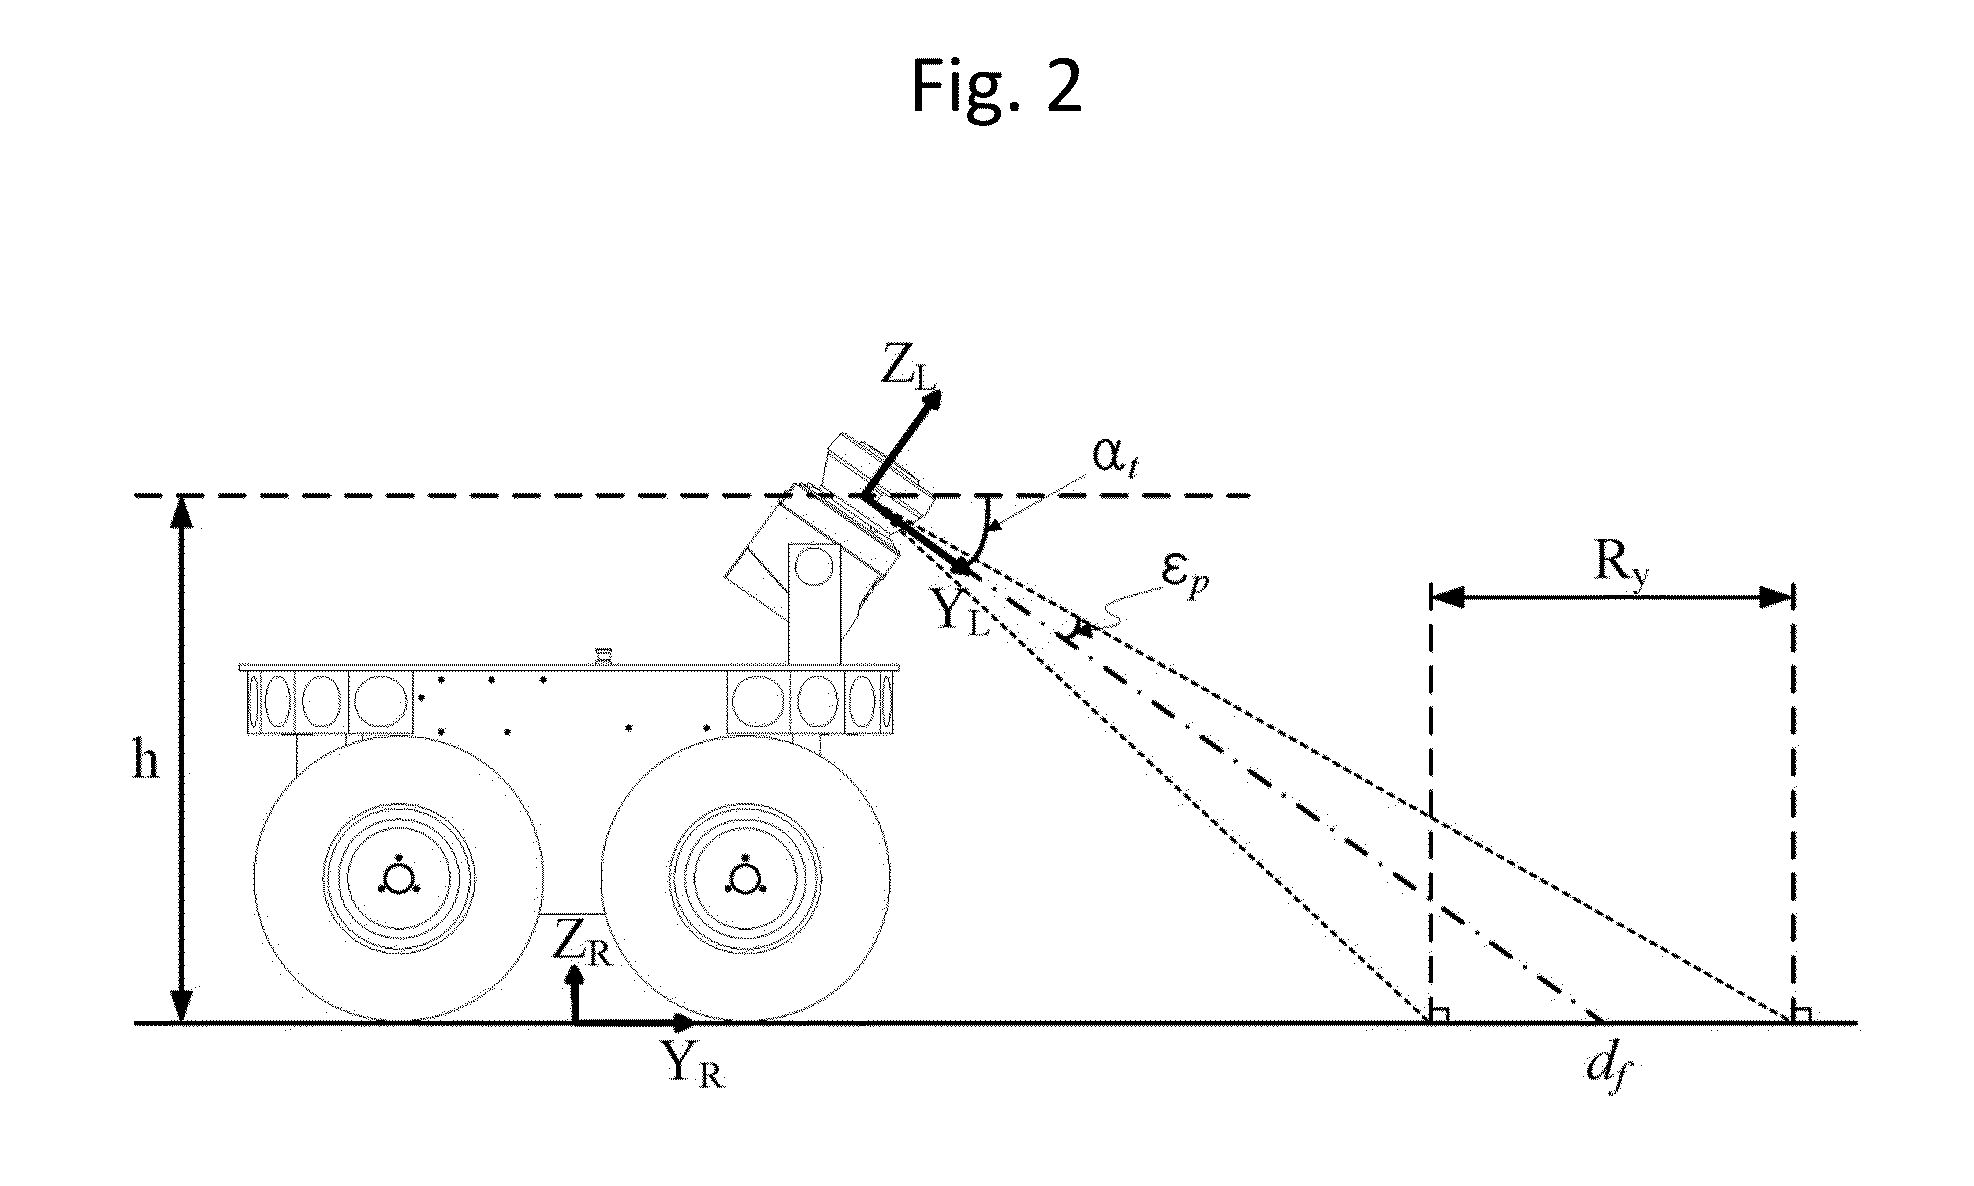 Method for extracting curb of road using laser range finder and method for localizing of mobile robot using curb information of road